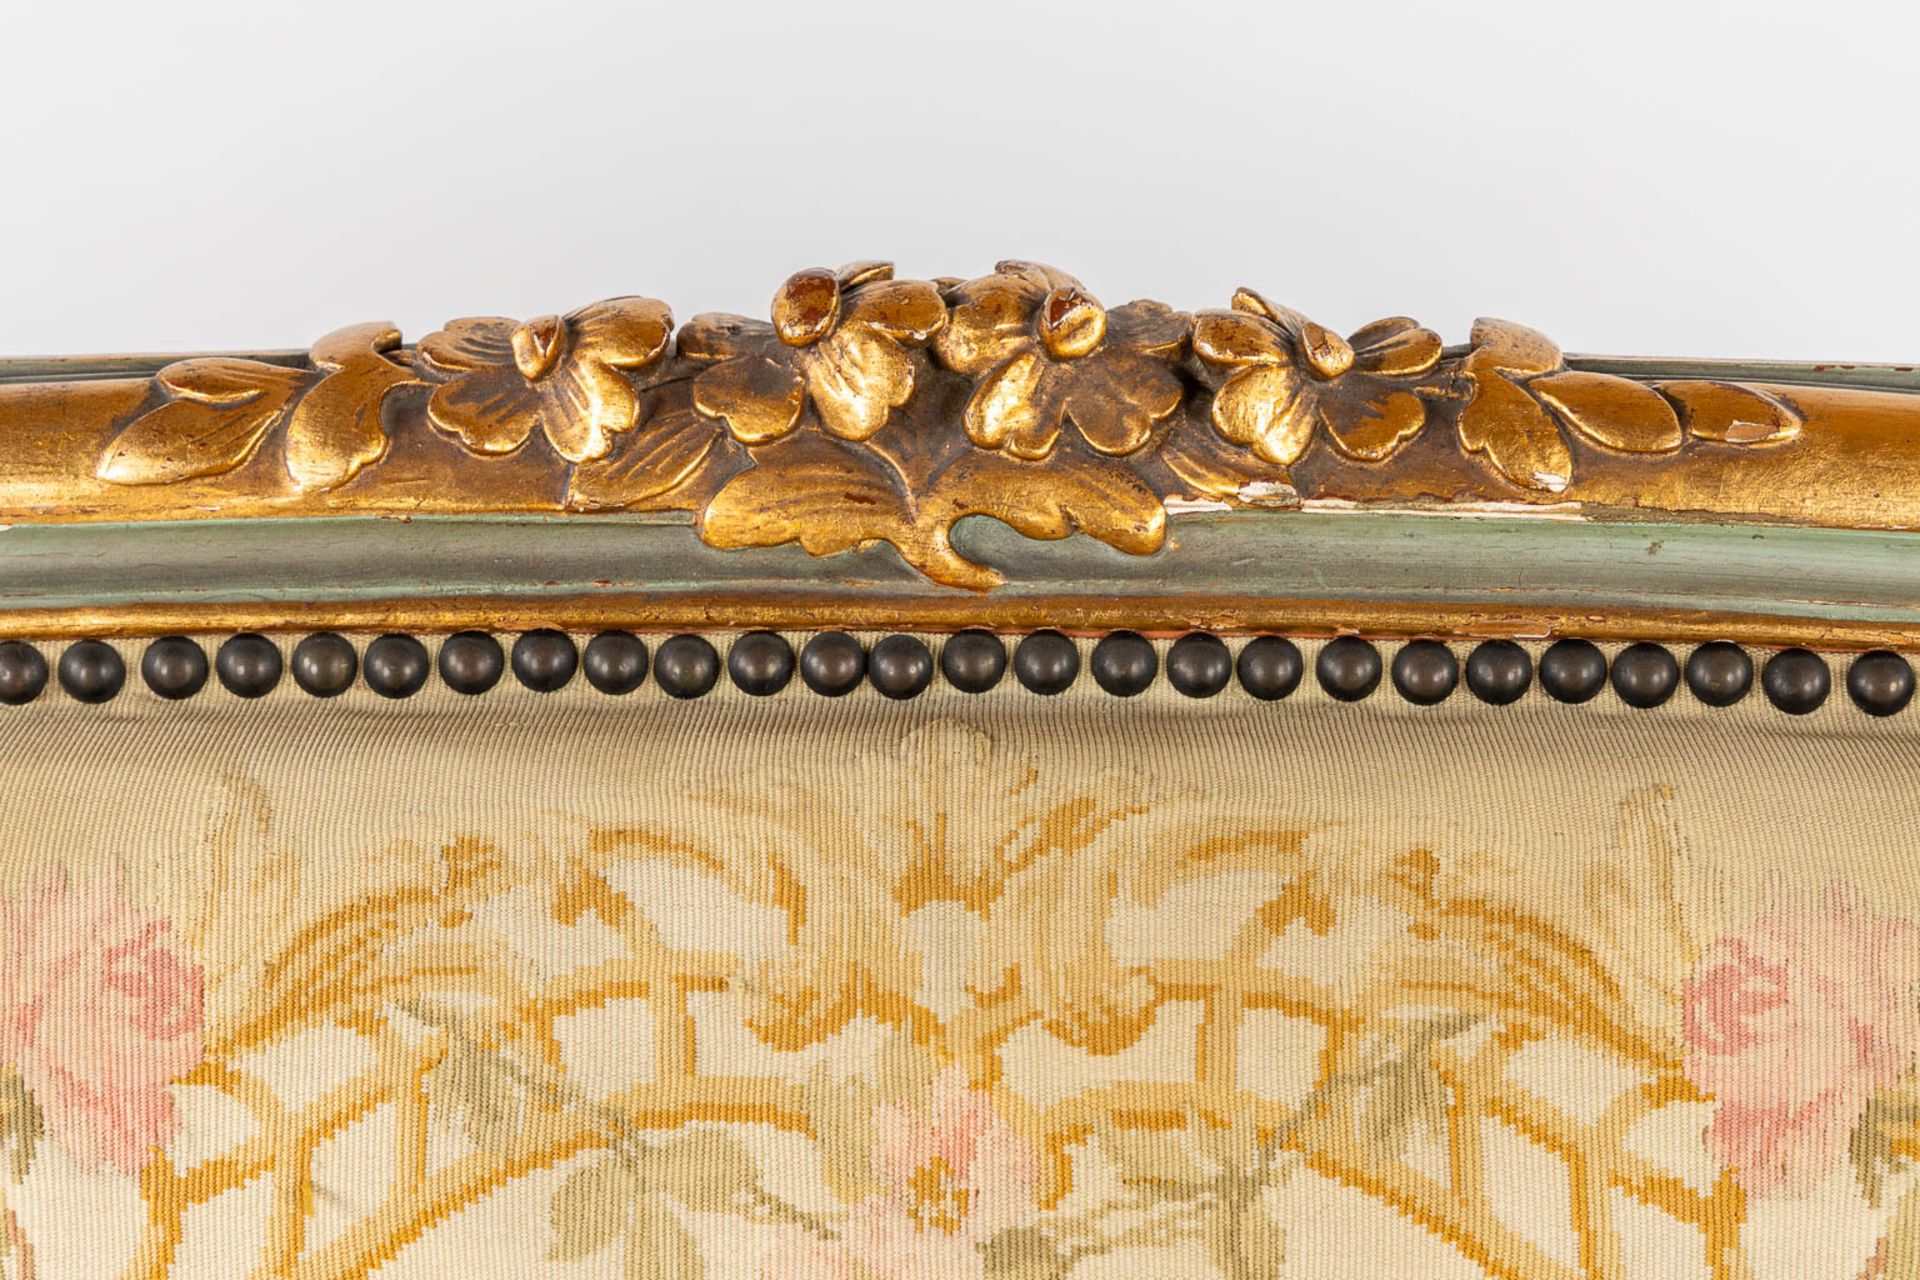 A Louis XV style sofa, upholstered with flower embroideries. (L:80 x W:175 x H:96 cm) - Image 7 of 11